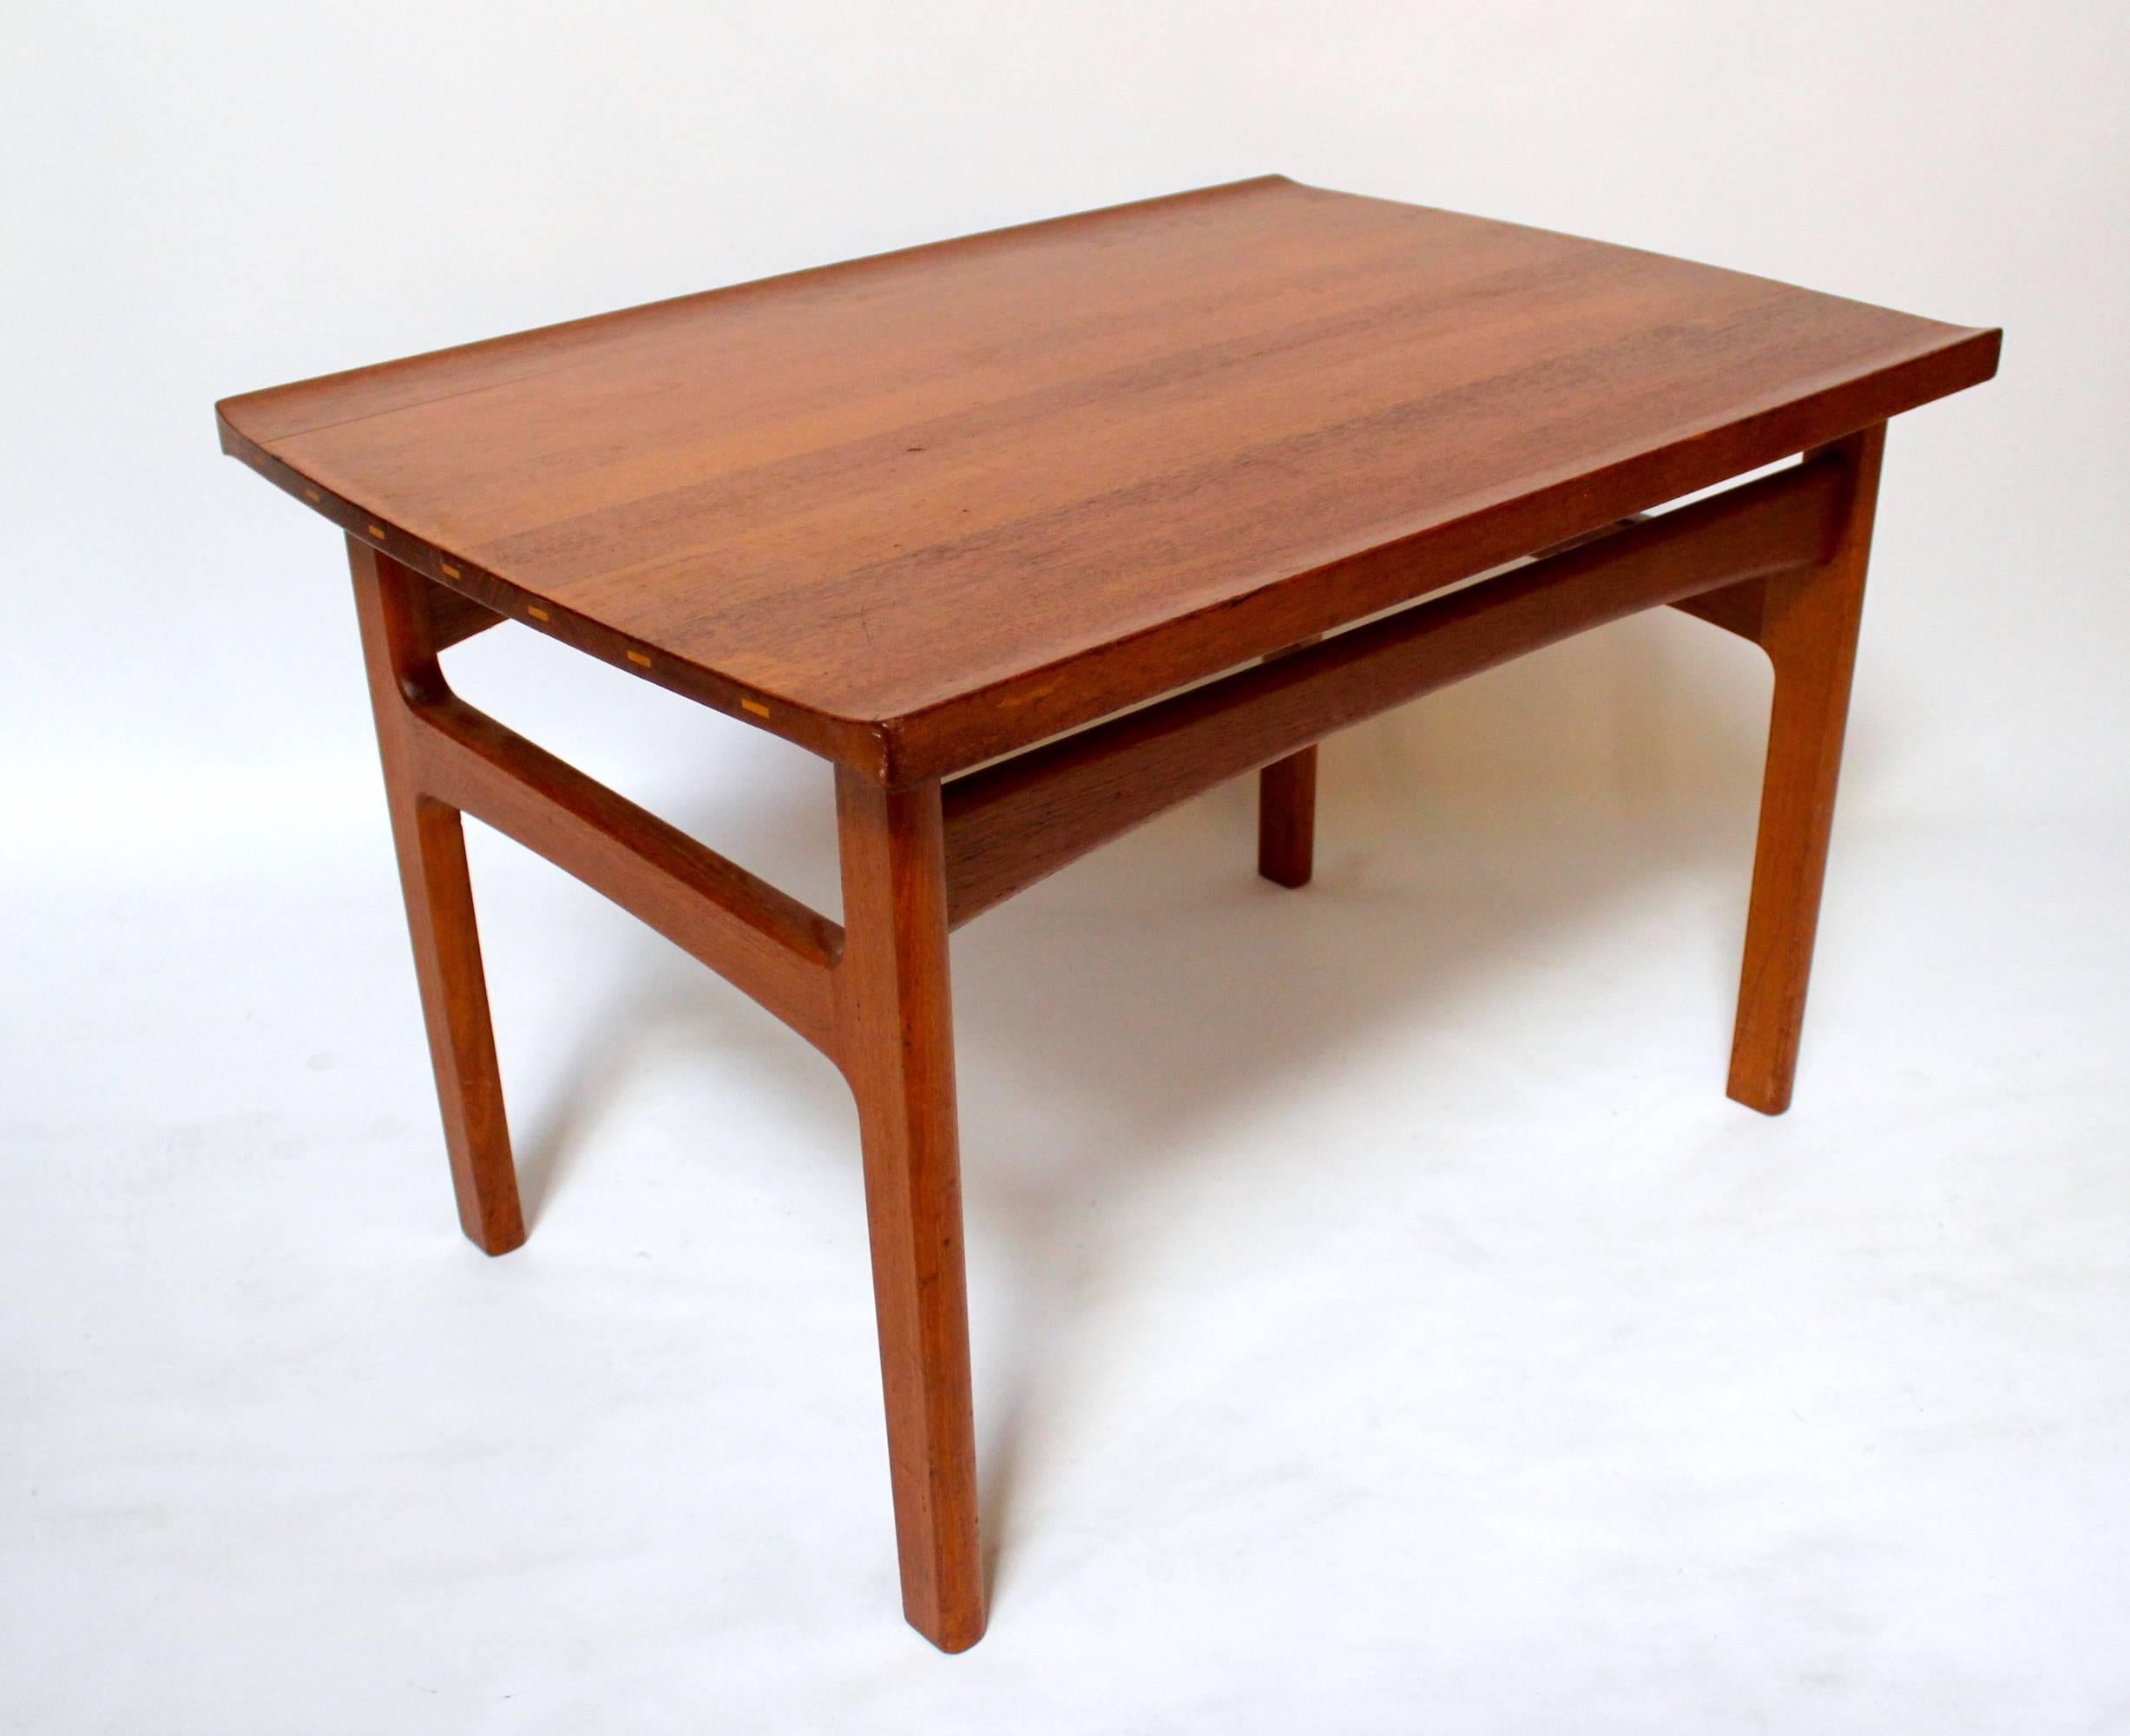 1960s Scandinavian Modern solid teak side table. Top is composed of solid teak boards with contrasting joining accents. Very nice curved accents along long sides of the top, and an almost sculptural base.